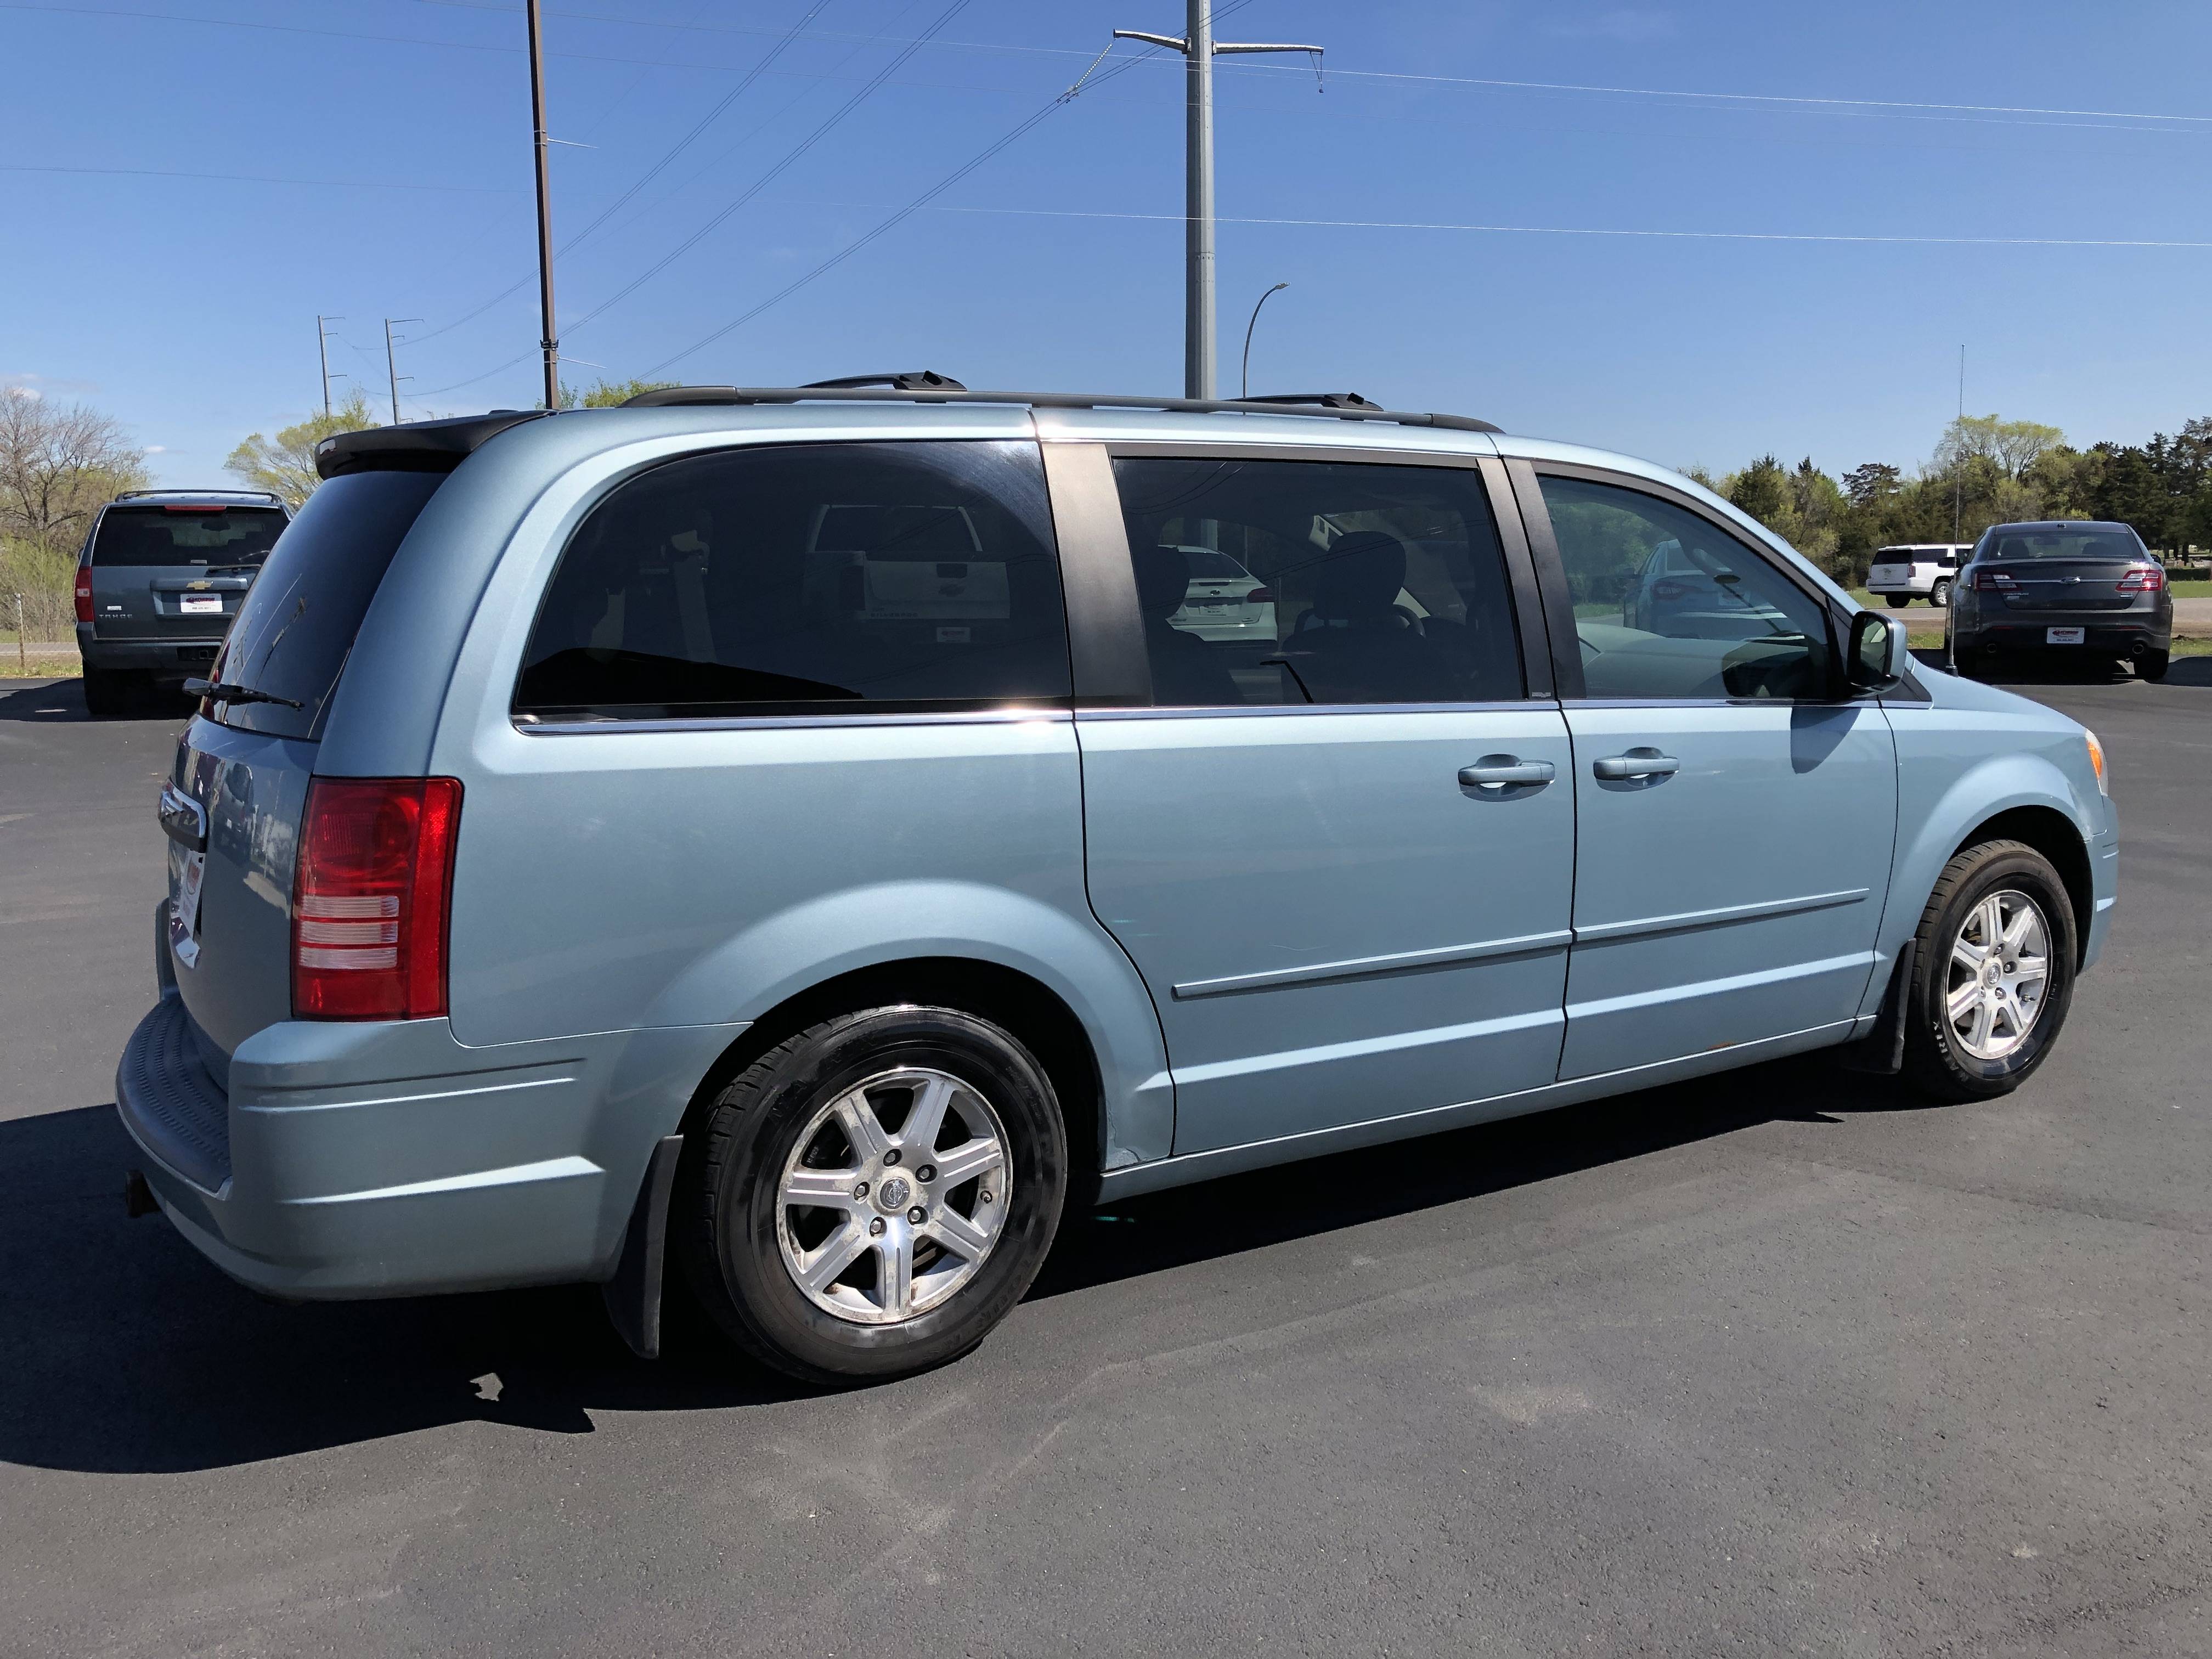 Used 2008 CHRYSLER TOWN AND COUNTRY TOURING for sale in